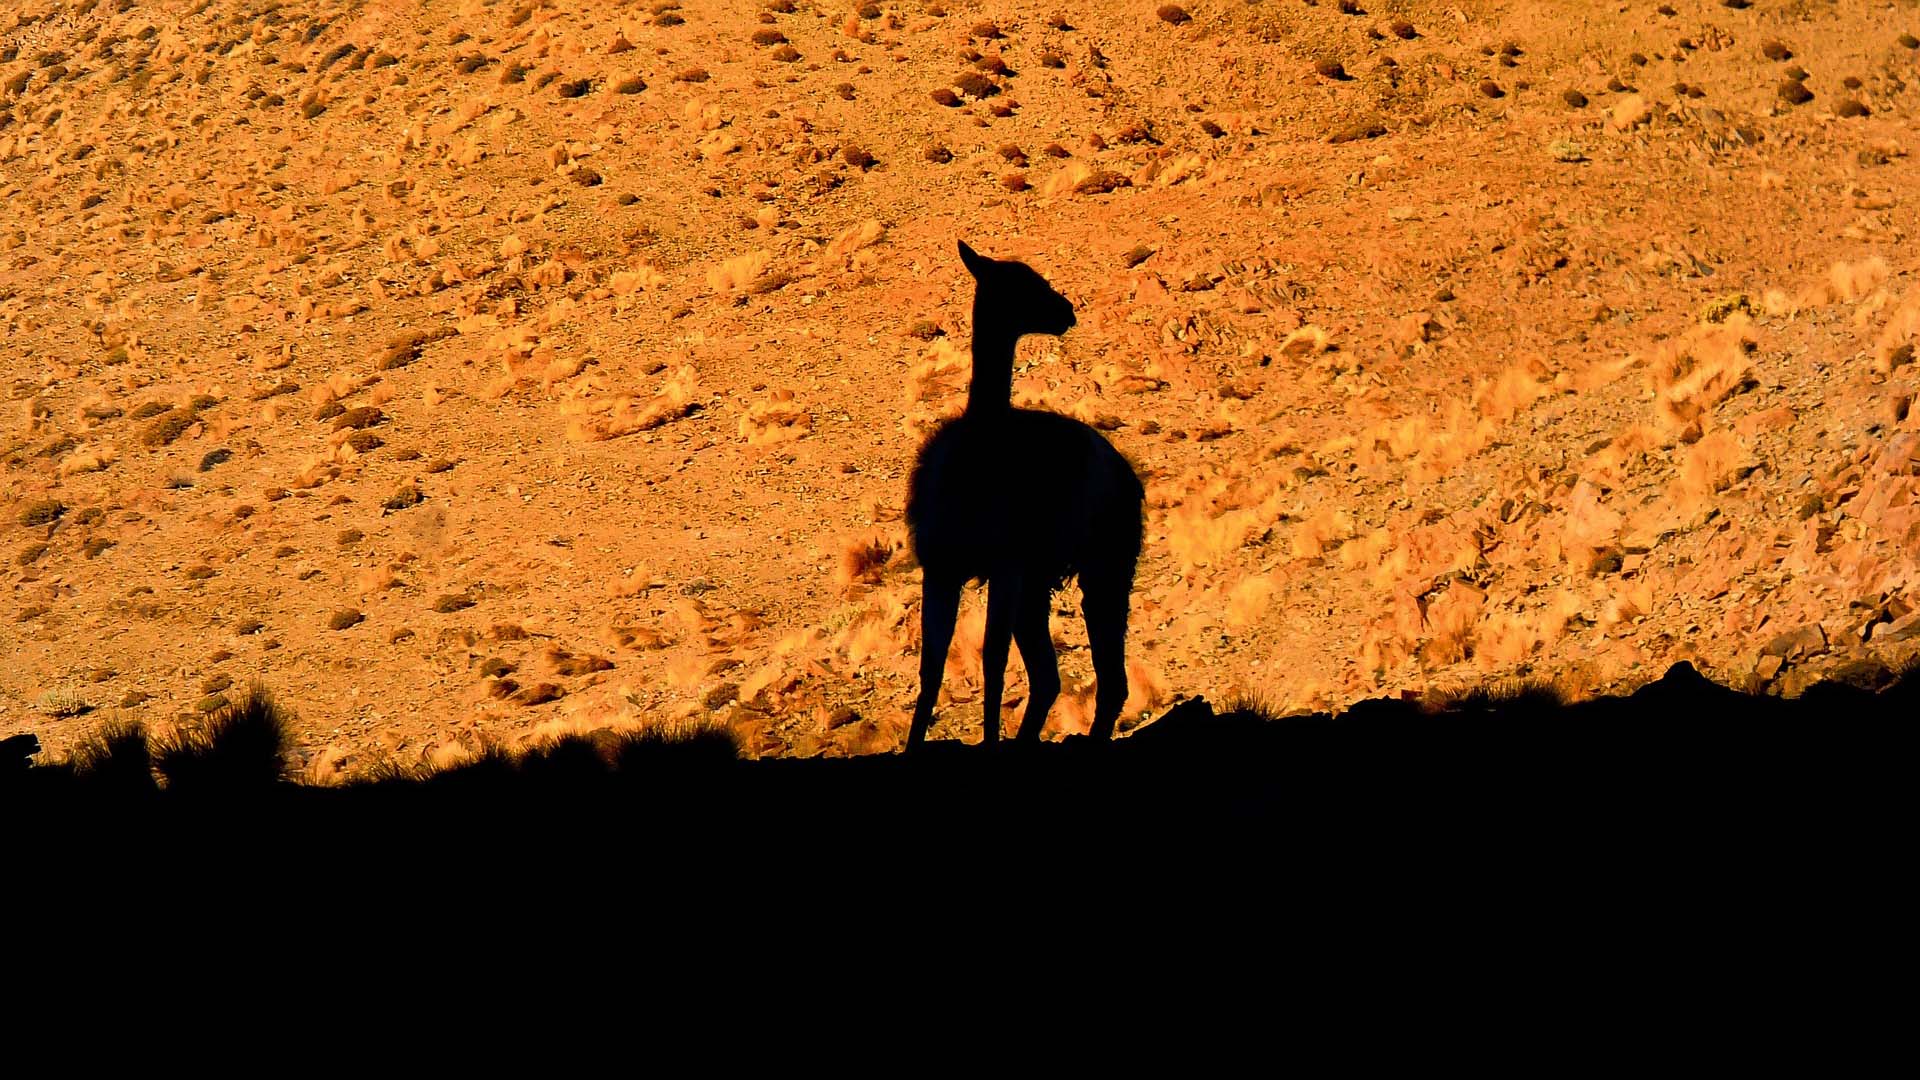 Silhouette of a llama in the desert